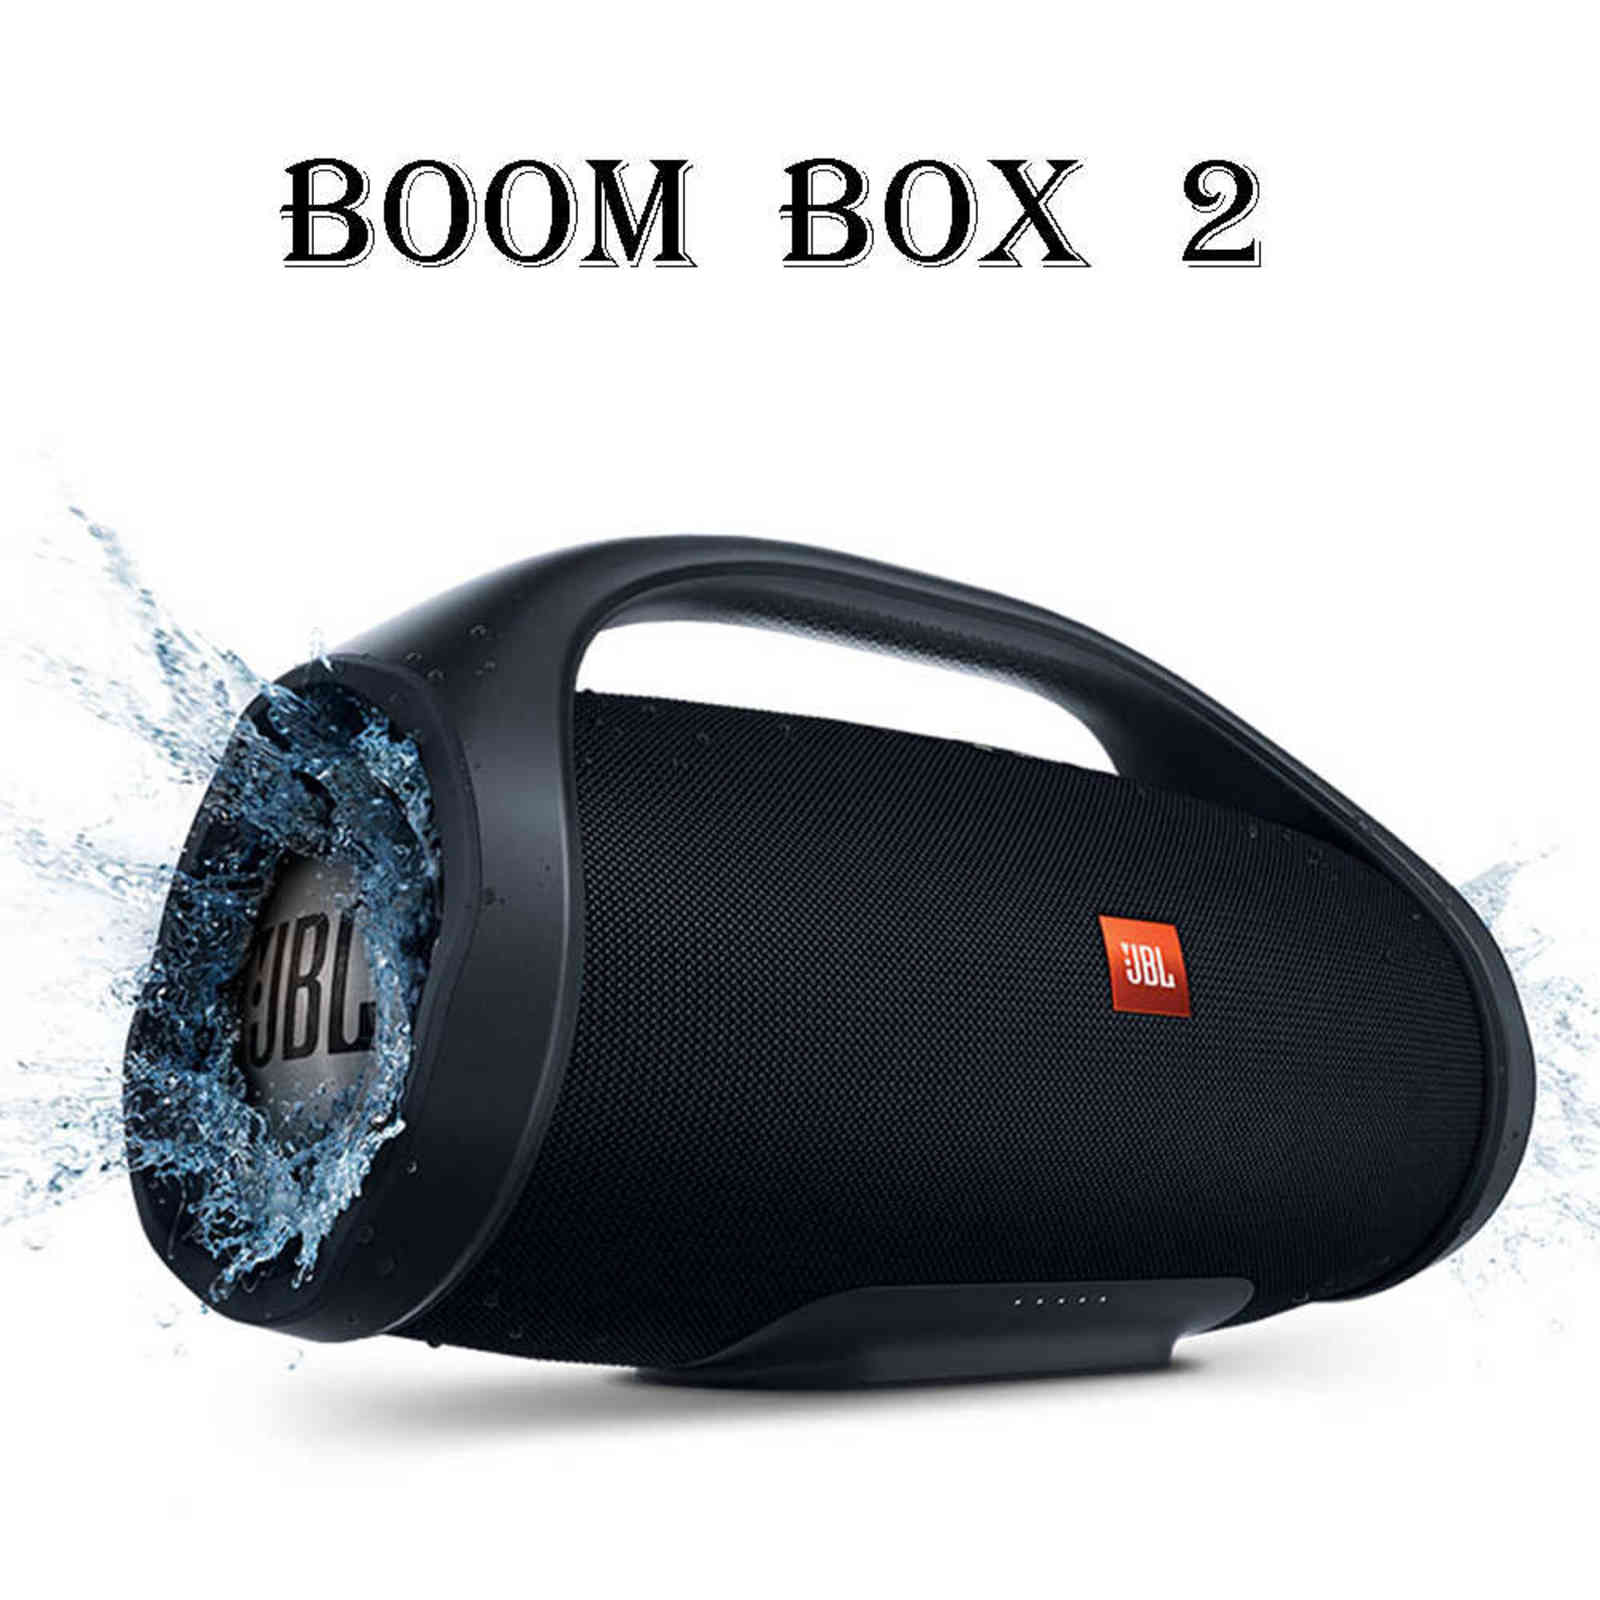 

JBL Boombox 2 Portable Wireless Bluetooth Speaker Powerful Bass Music Outdoor IPX7 Waterproof Stereo Xtreme 2 3 CHARGE 4 PULSE 4 H1111